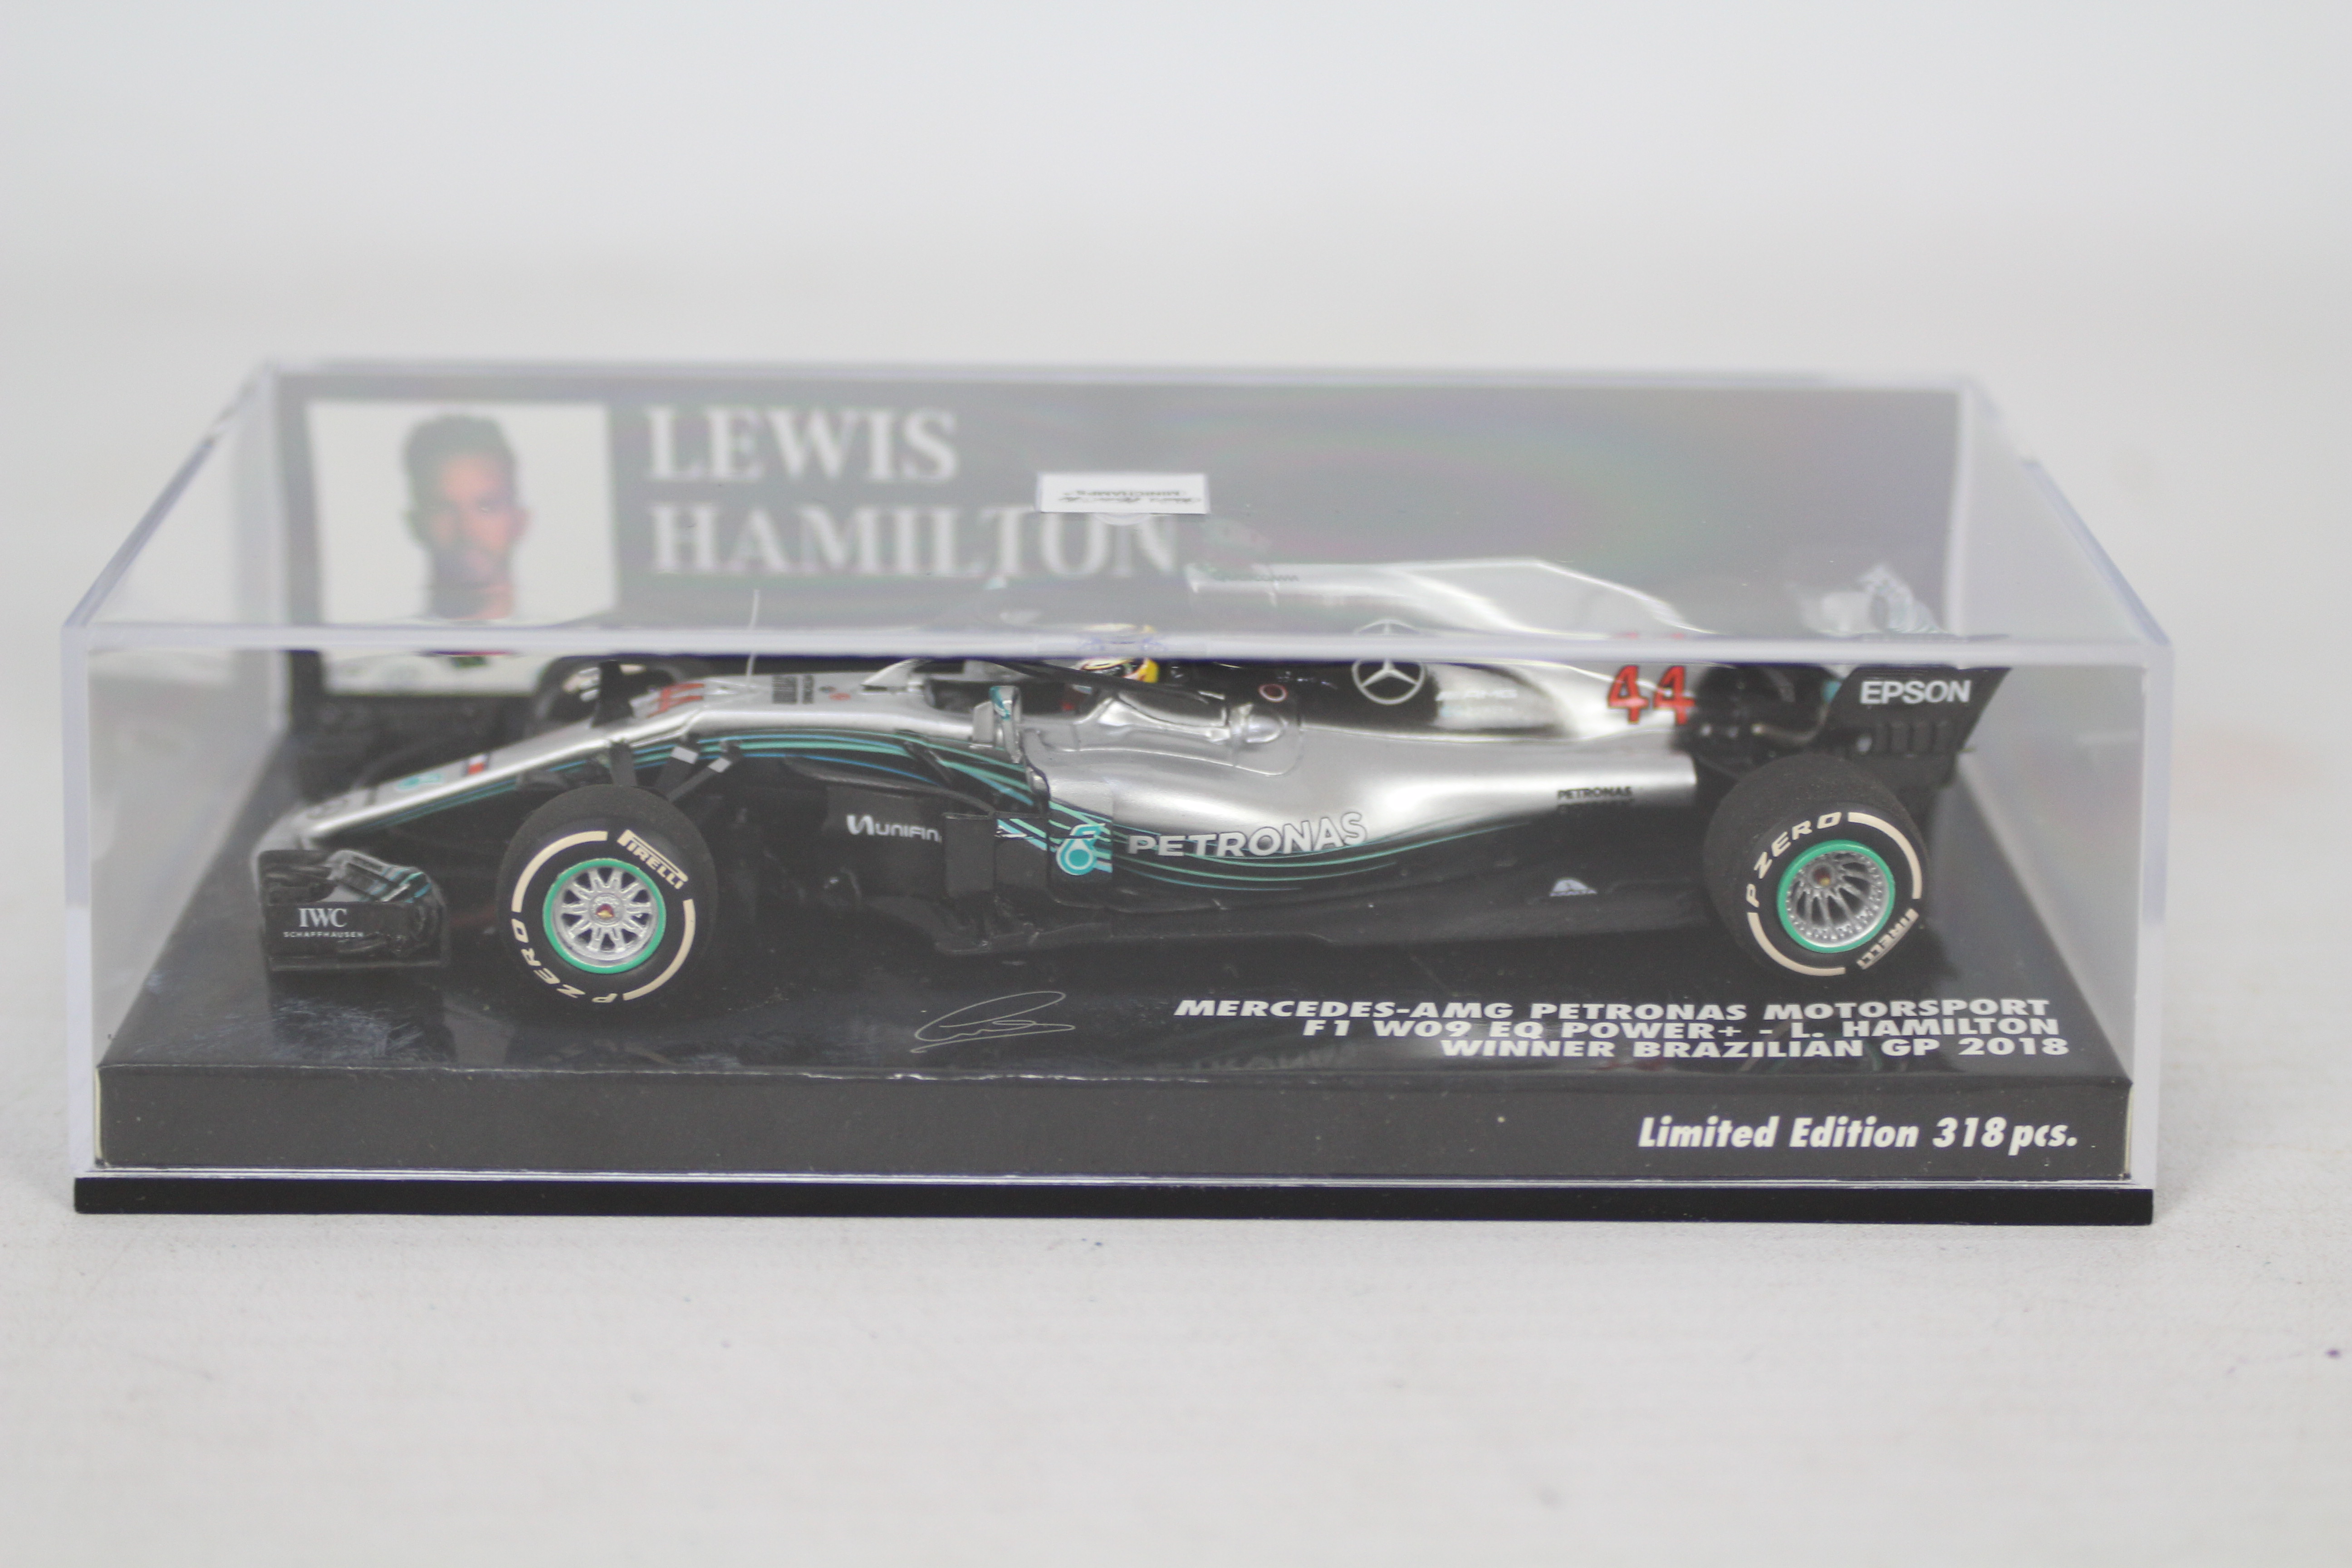 Minichamps - Three boxed 1:43 scale 'Lewis Hamilton' F1 racing car resin models. - Image 4 of 4